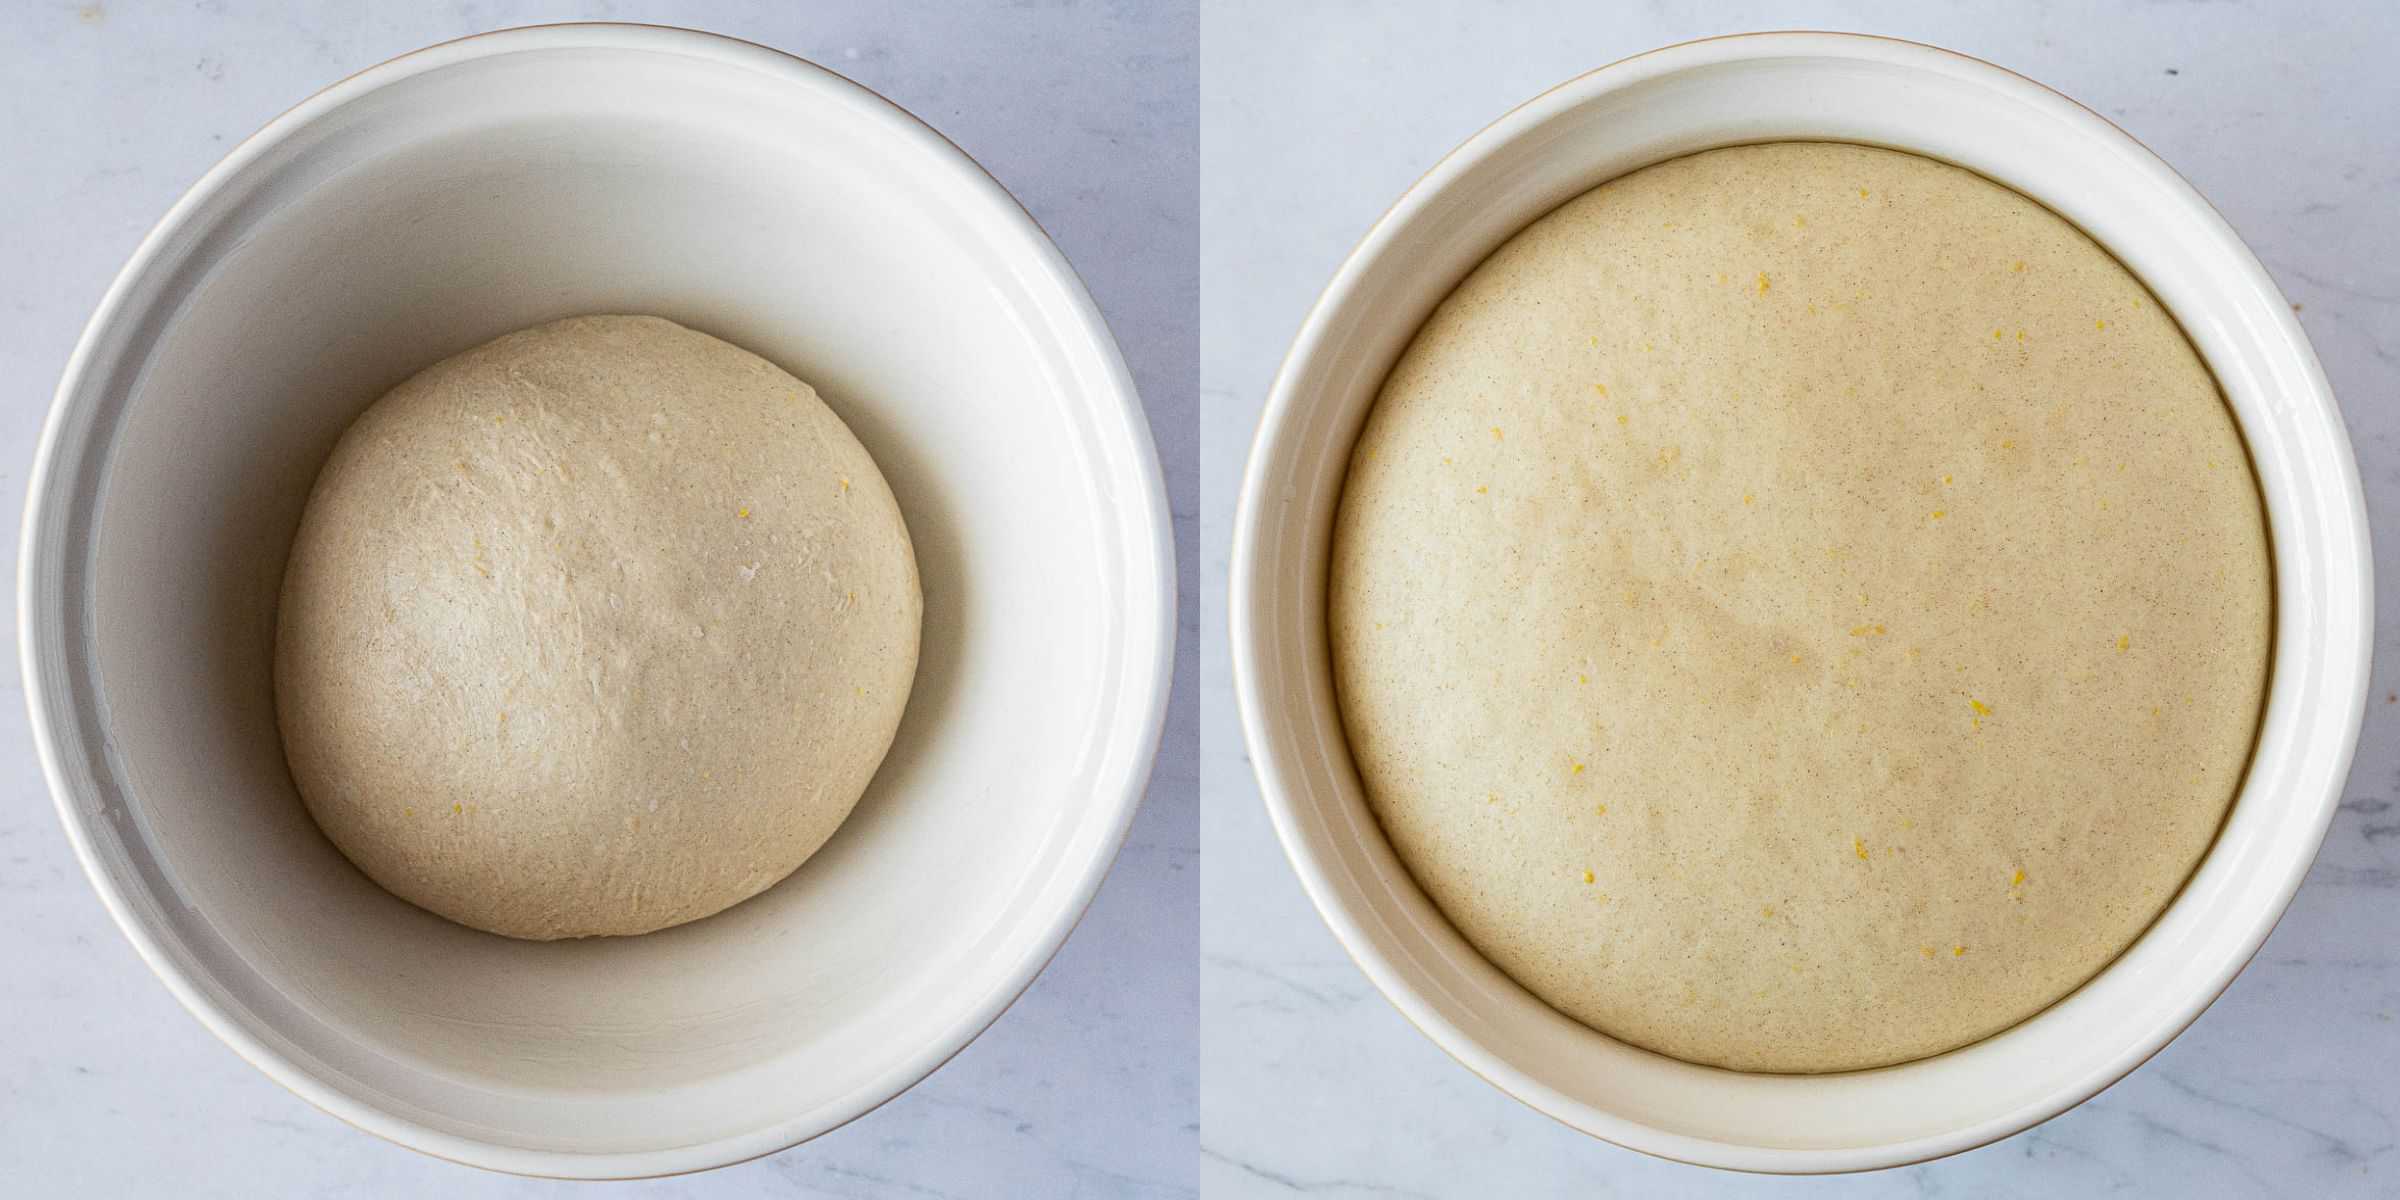 Step 2, a two image collage of the dough before and after rising.